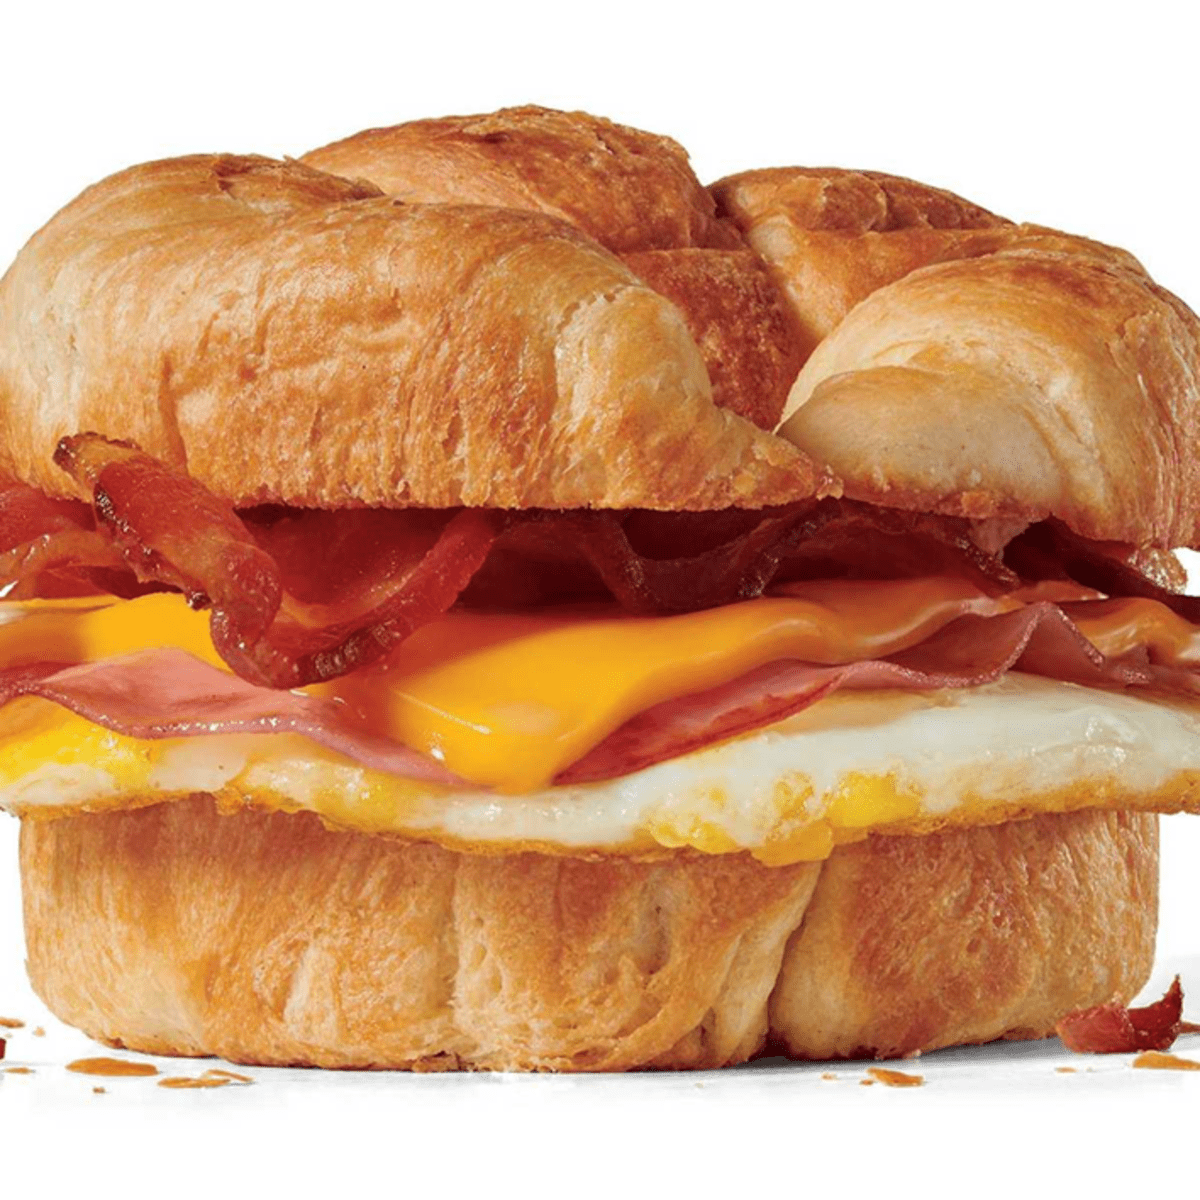 A croissant sandwich with bacon, eggs and cheese.